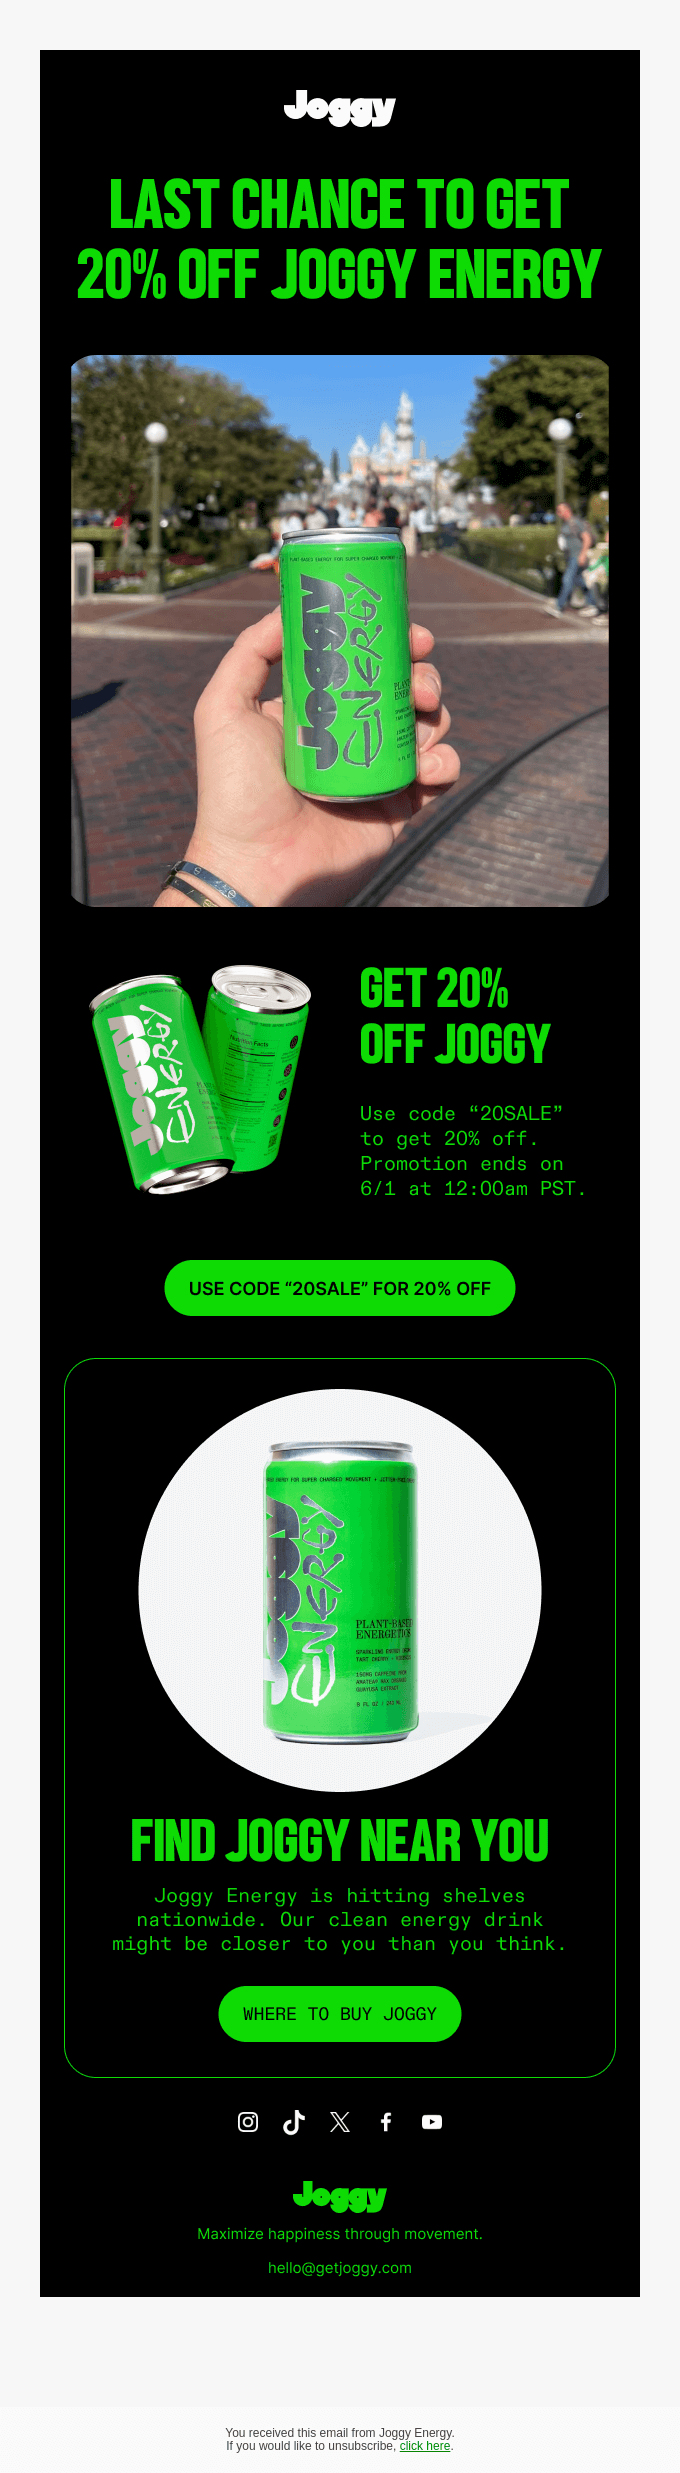 LAST CHANCE: 20% Off Joggy Energy